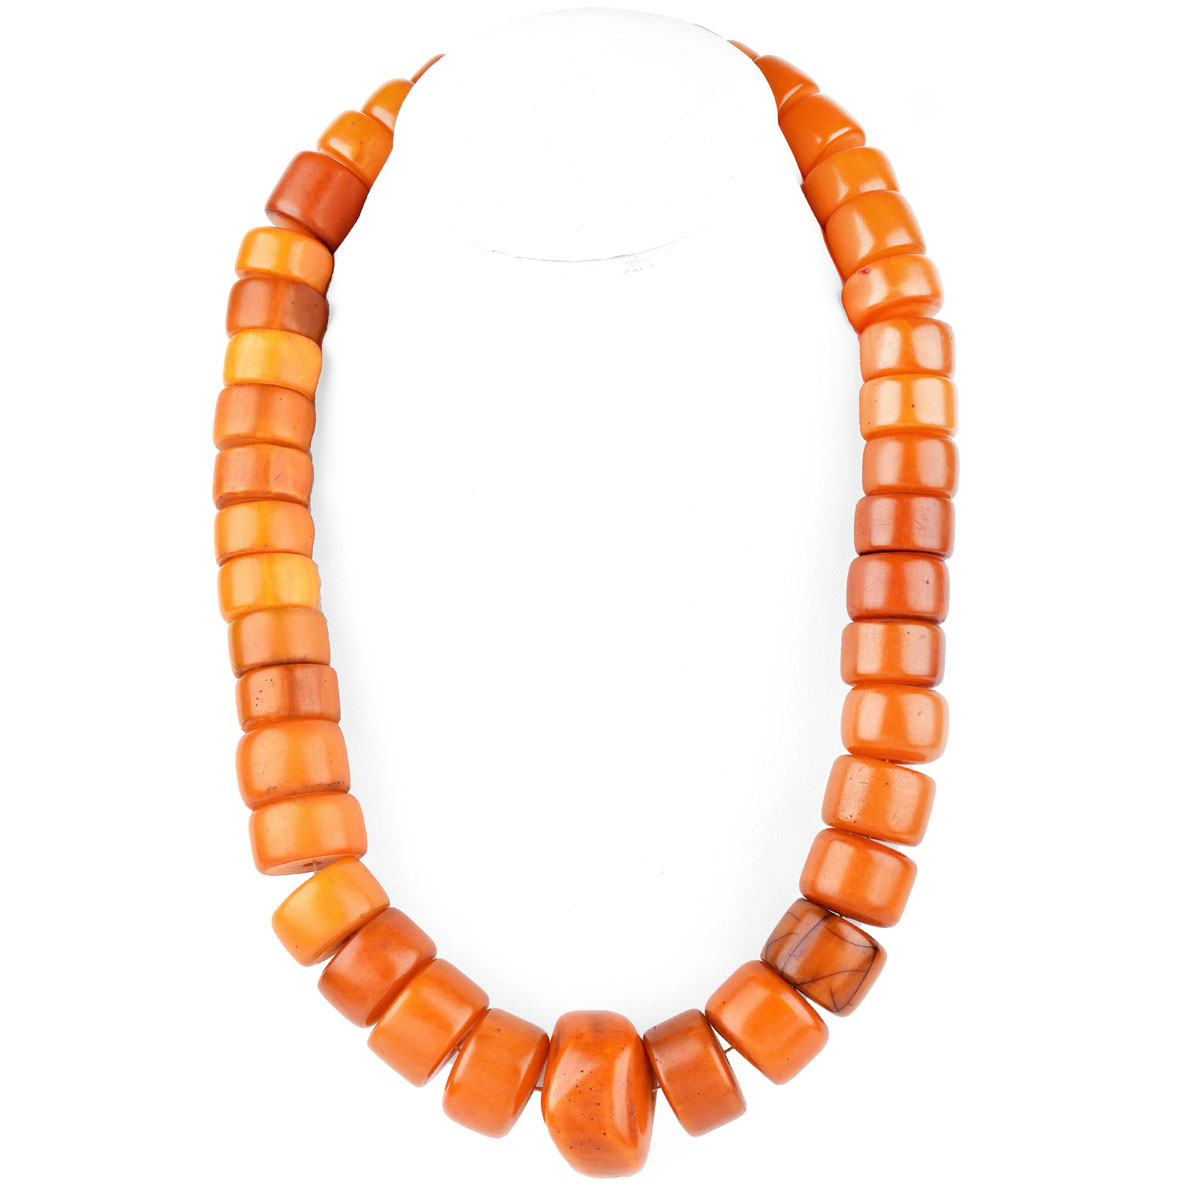 Large Antique Graduated Amber Beaded Necklace, Possibly Tibetan. Natural deep color tones with typical stress lines to a few beads overall good condition.